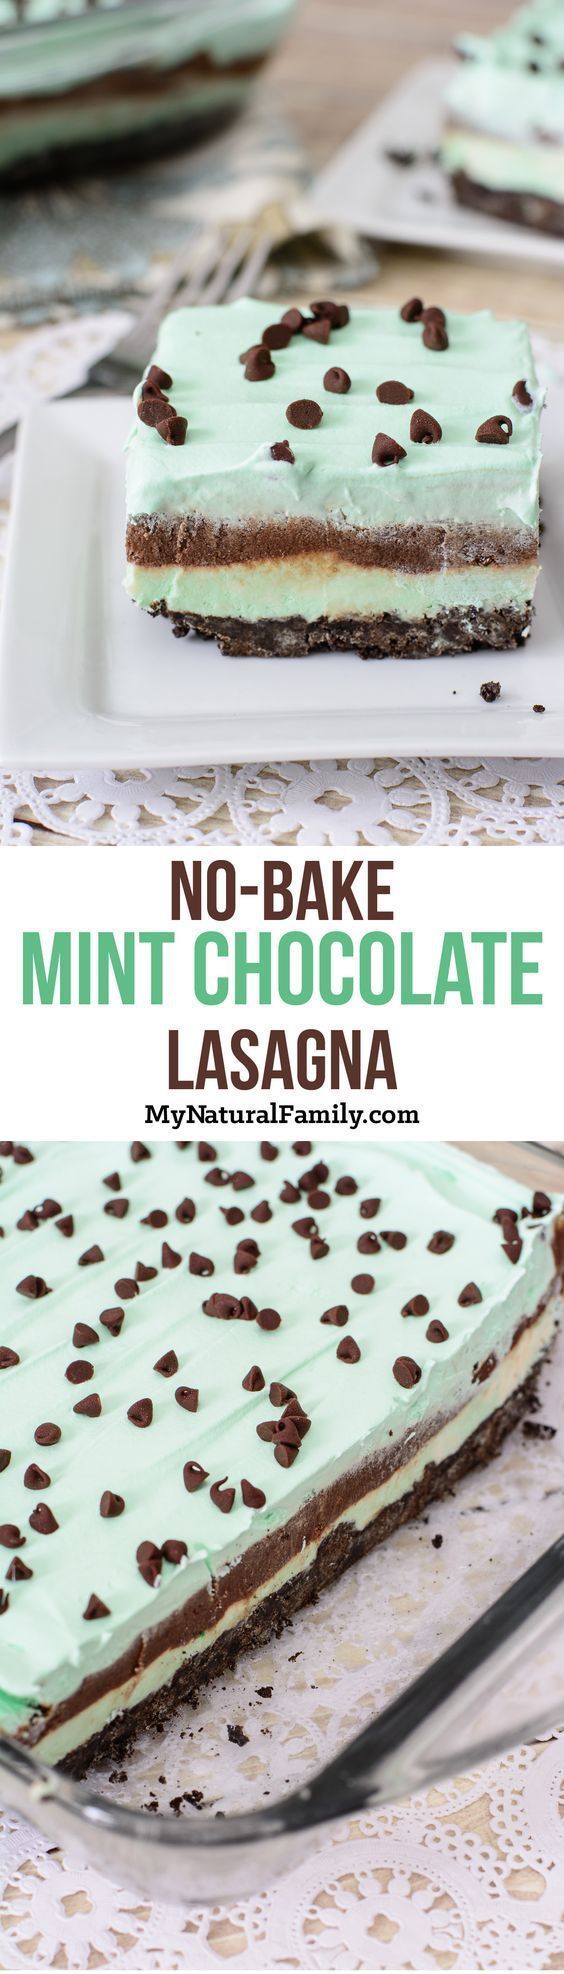 No-Bake Mint Chocolate Lasagna Dessert Recipe via My Natural Family – Ive got to try this recipe. It looks easy enough for my kids